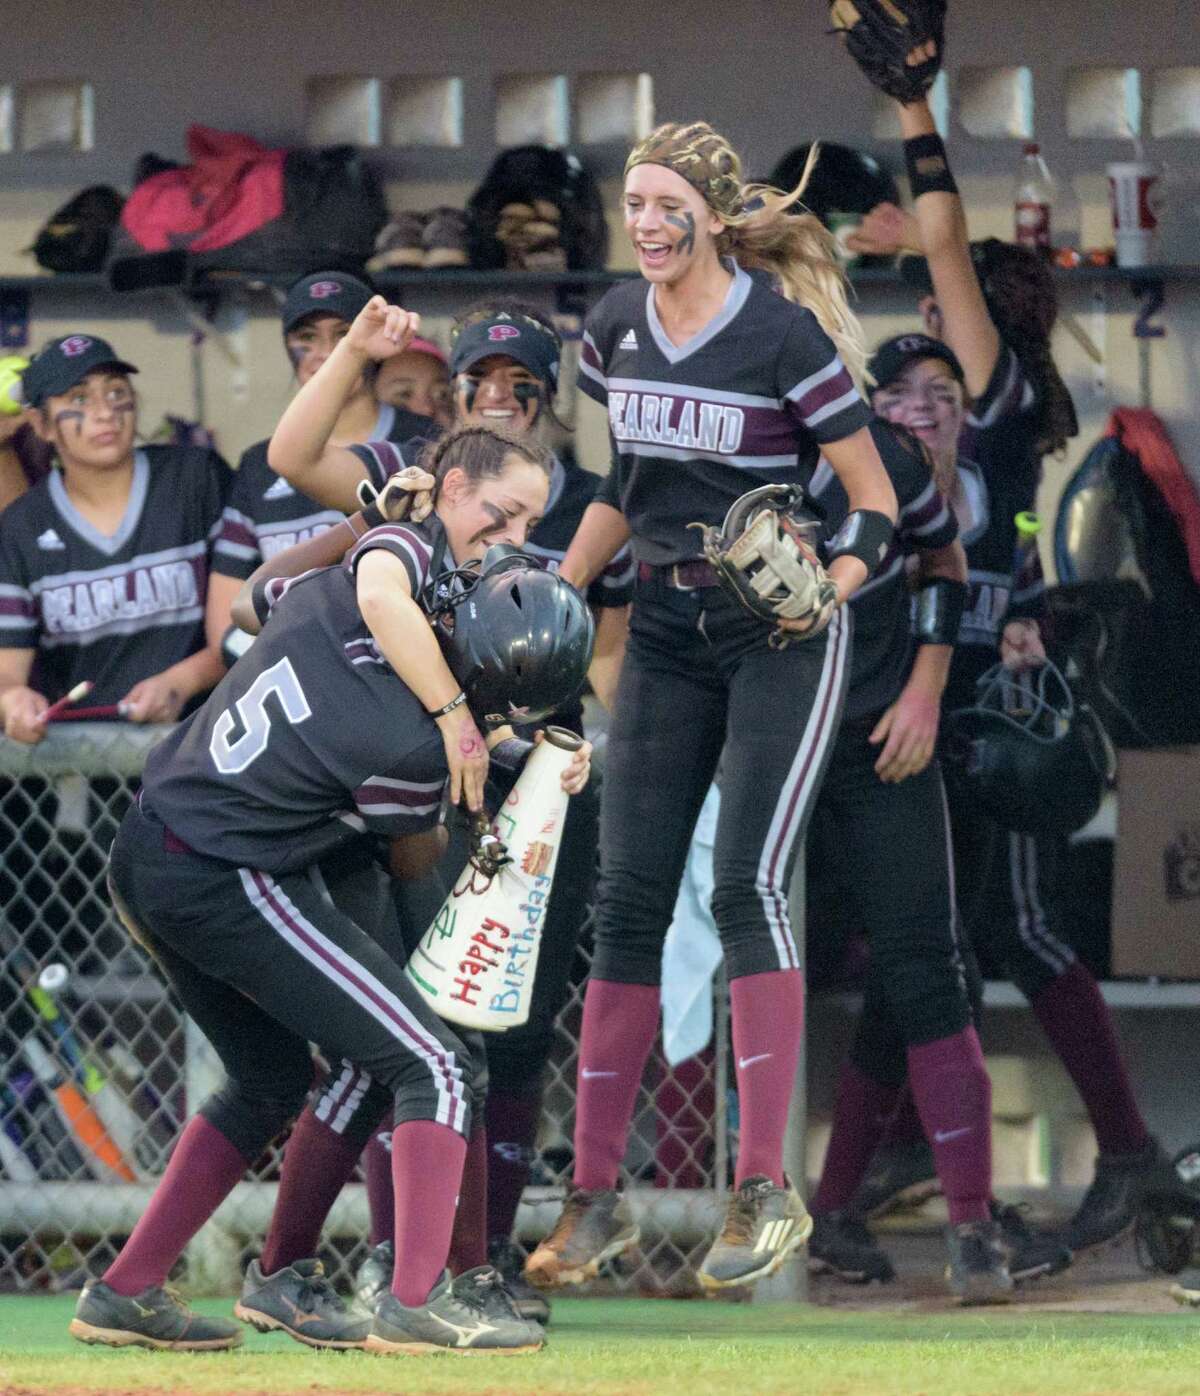 Lindsey Stewart (5) celebrates with her Pearland teammates after scoring in the second inning Friday.